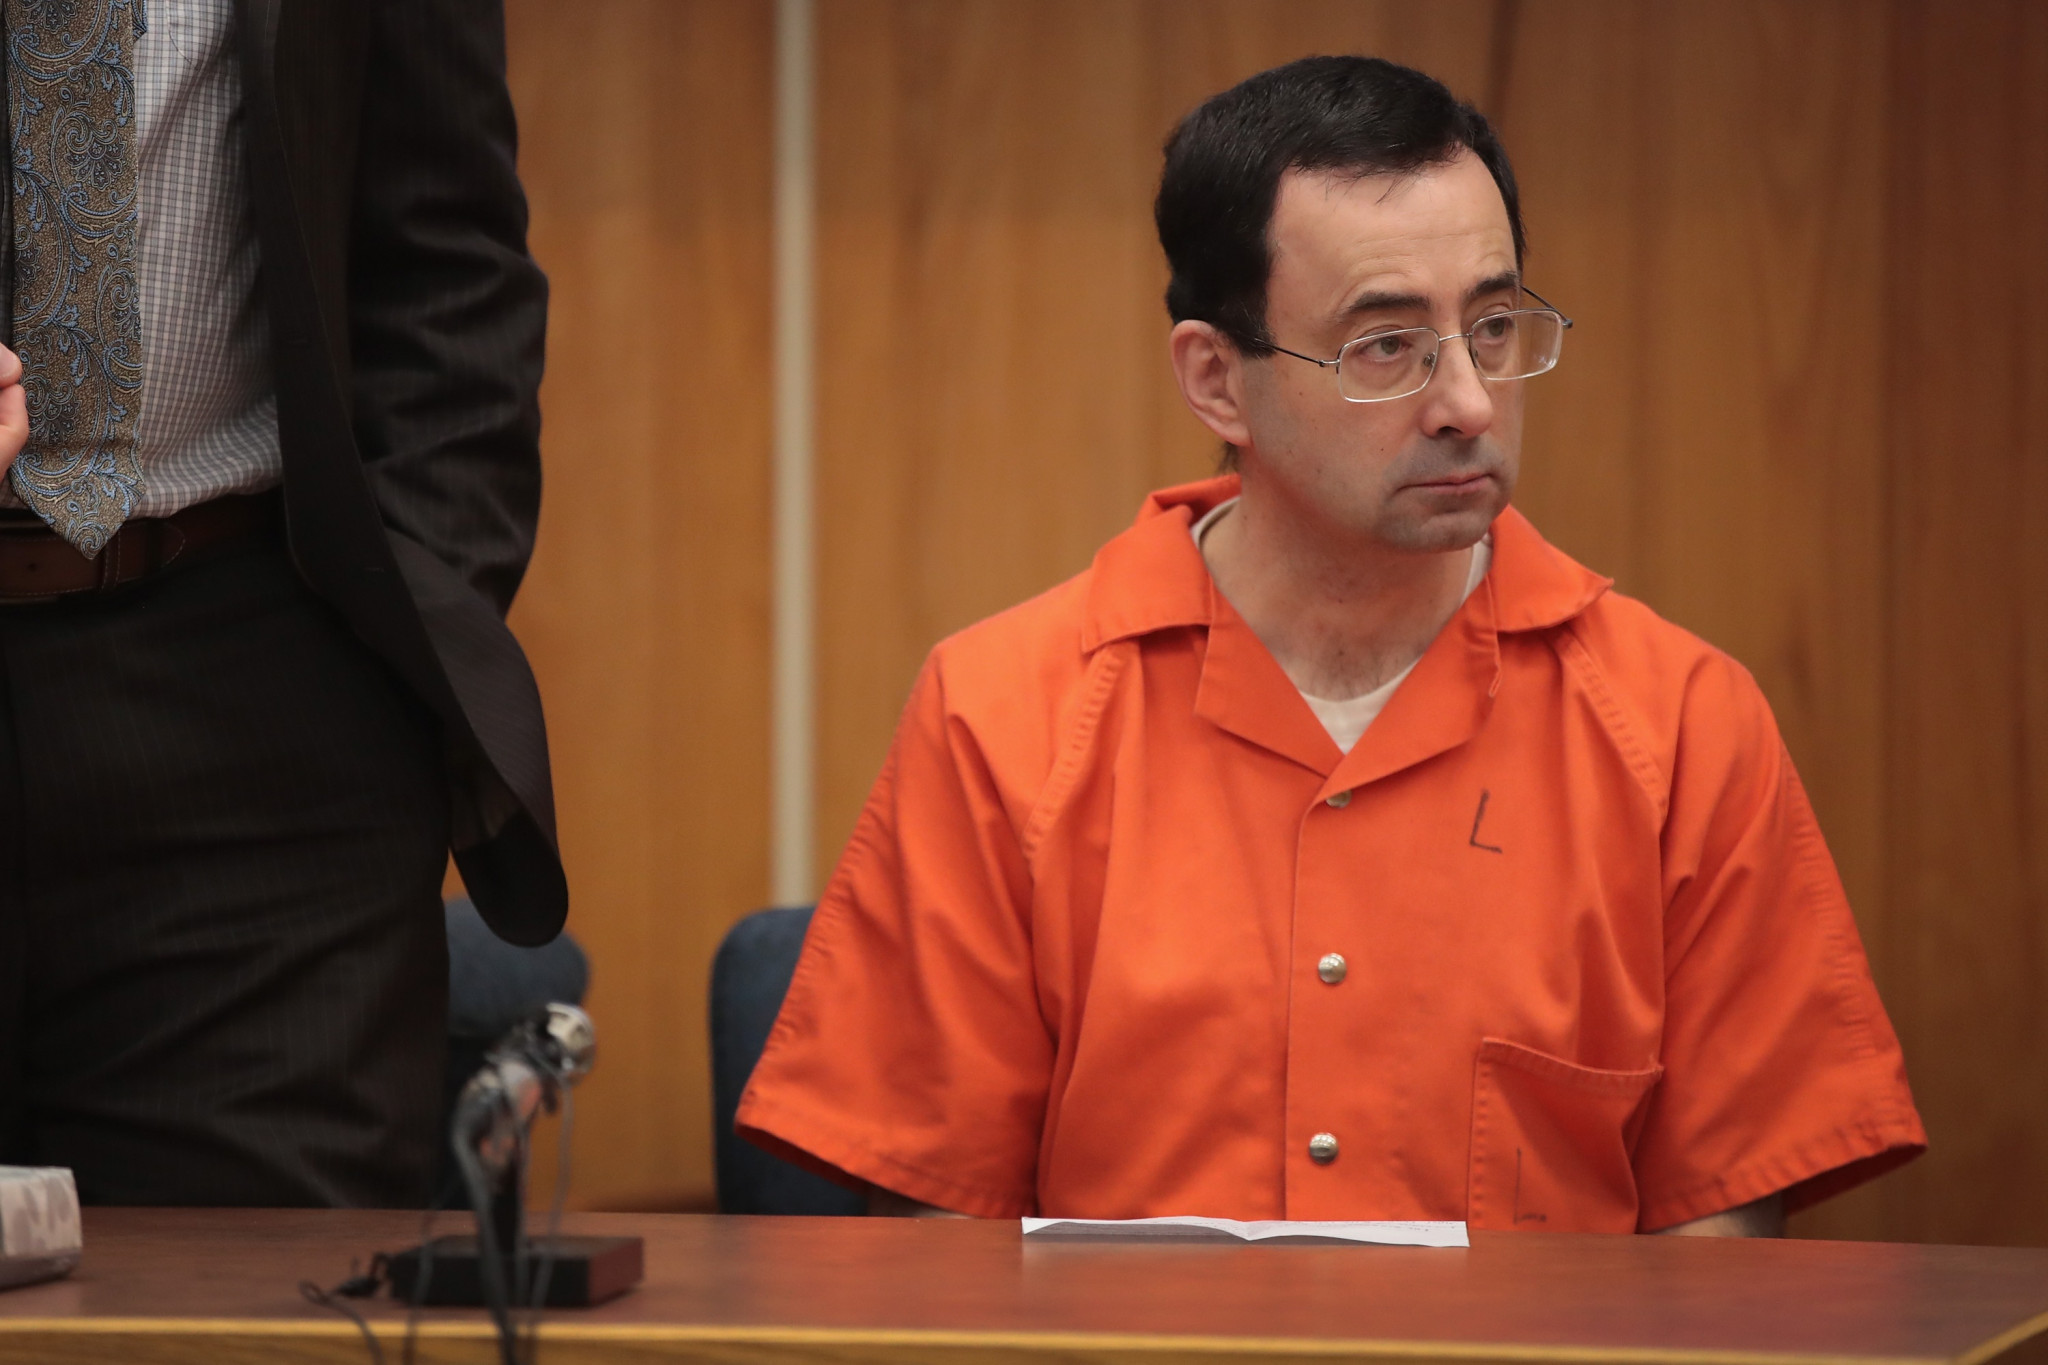 The USOPC has been criticised over its handling of the Larry Nassar case ©Getty Images